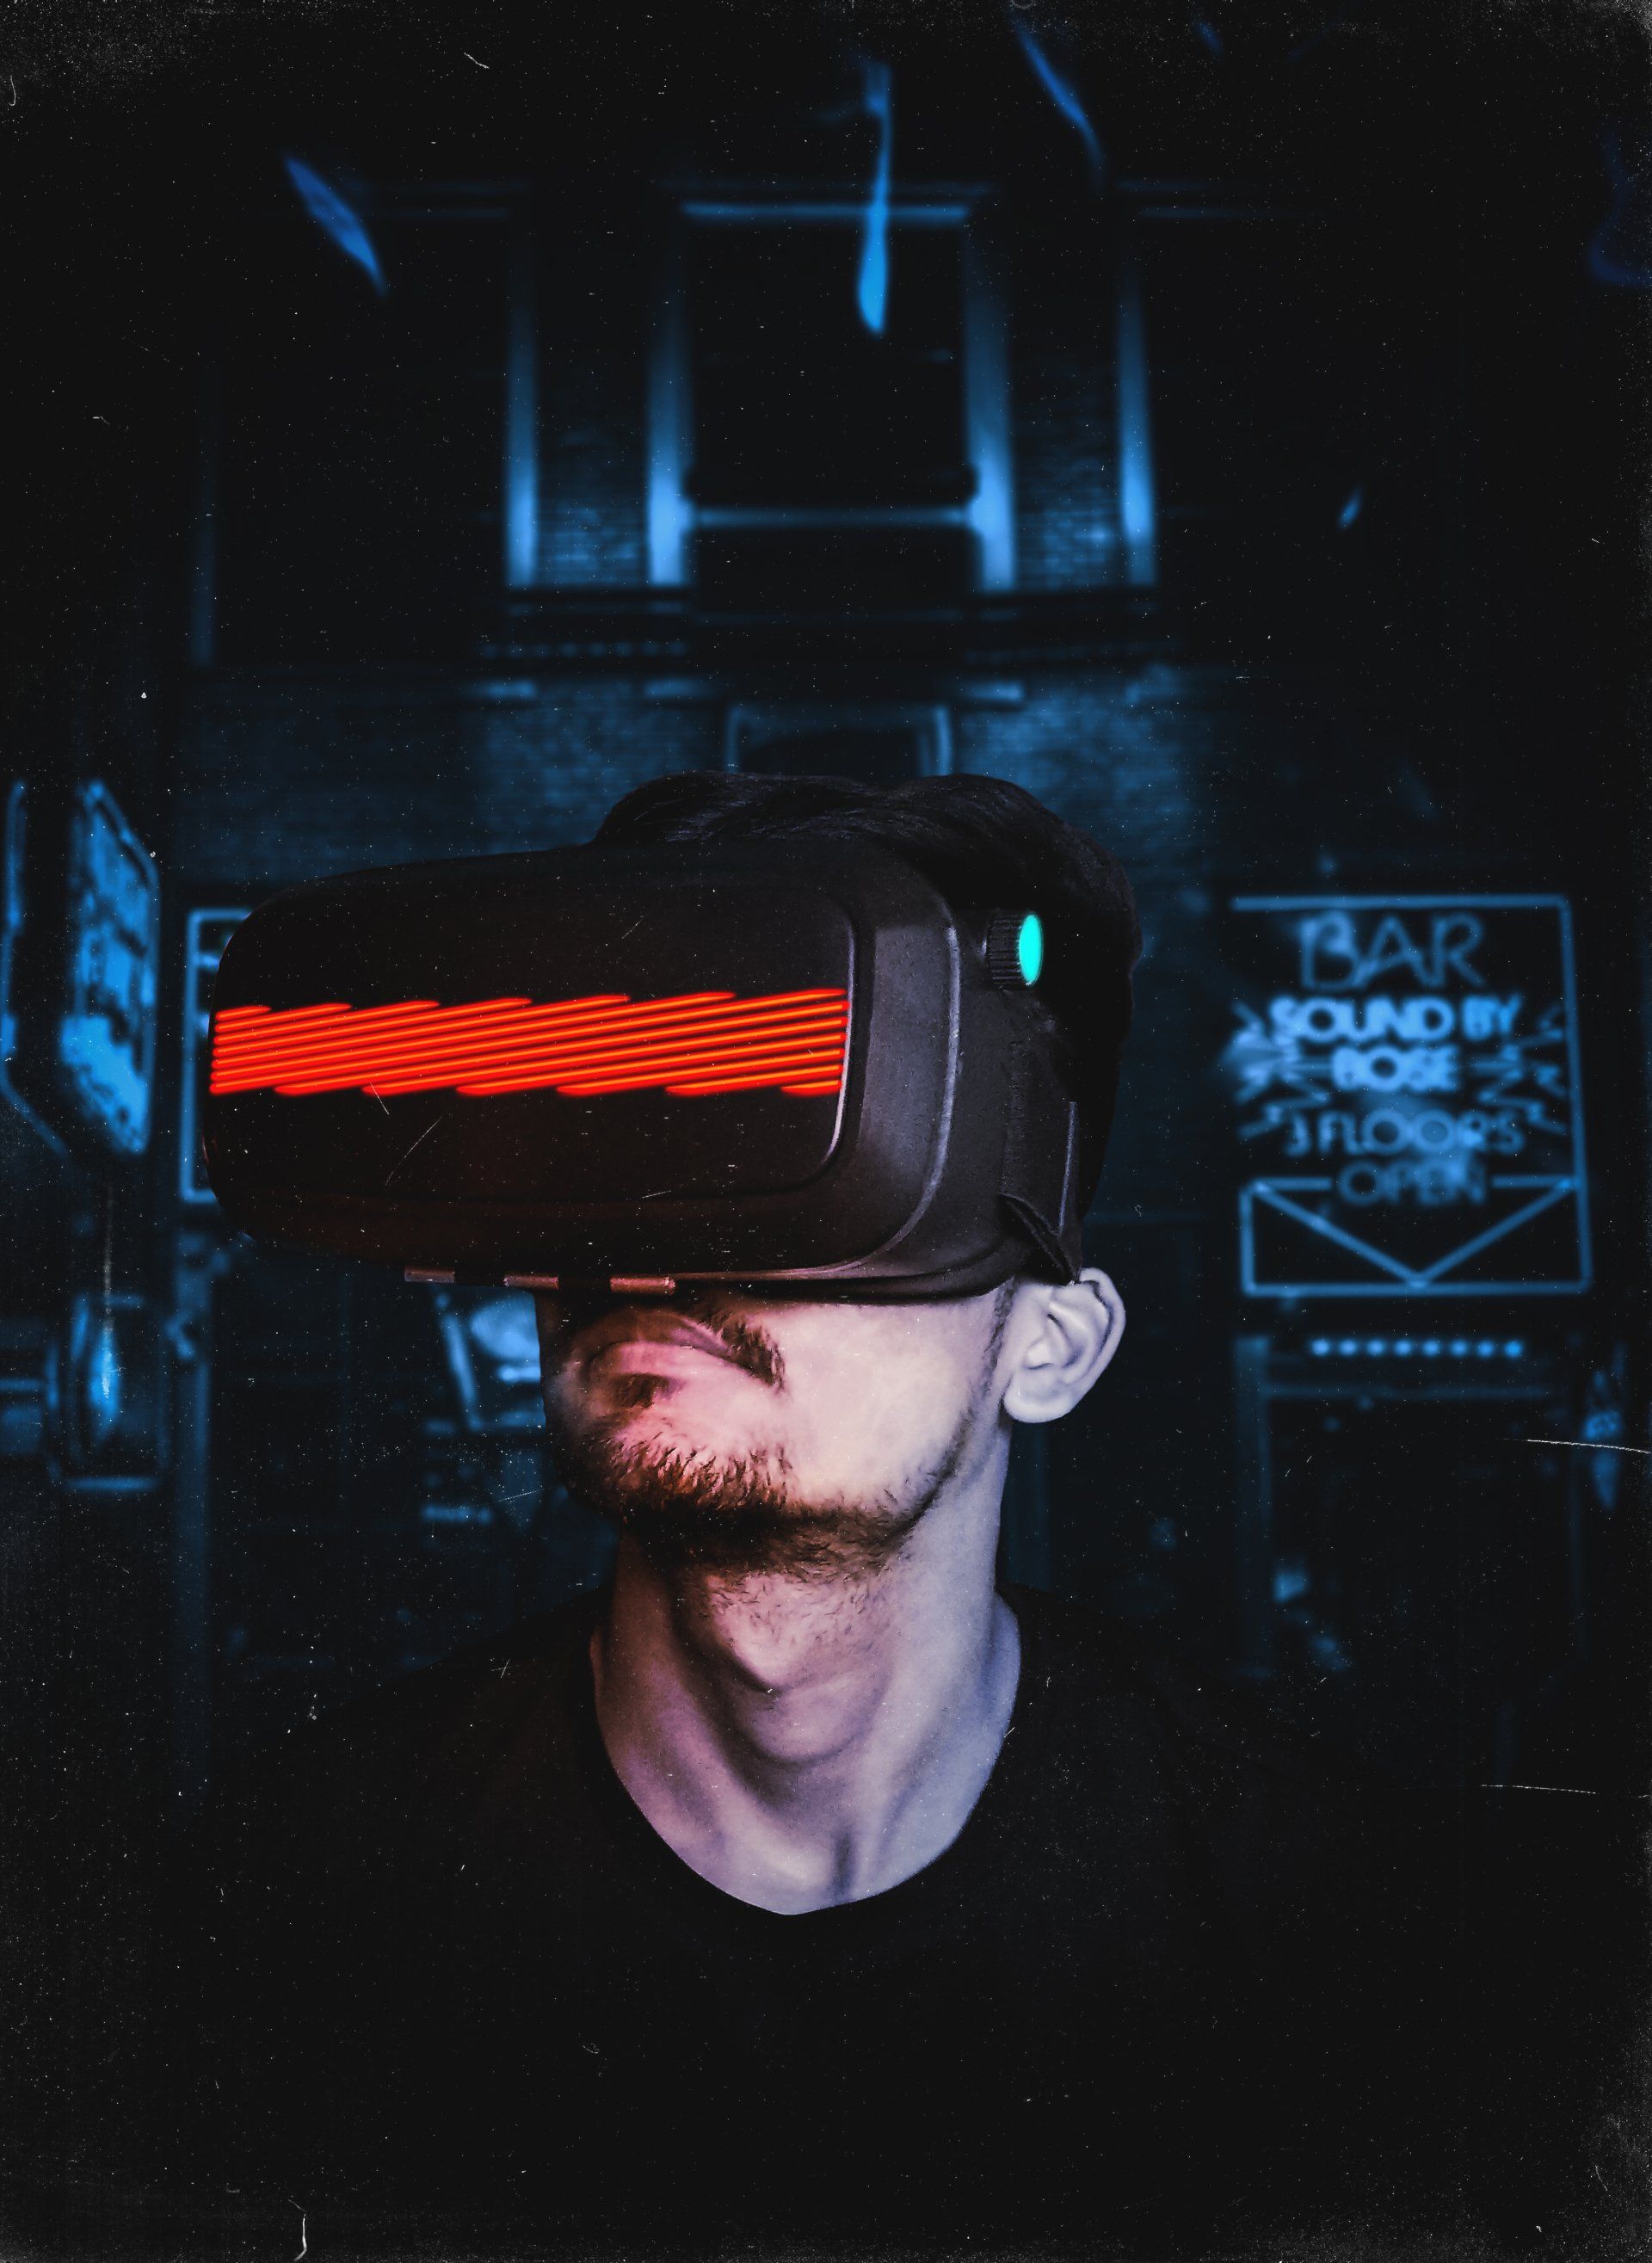 Illustration depicting individuals experiencing virtual reality beyond gaming, showcasing the divers